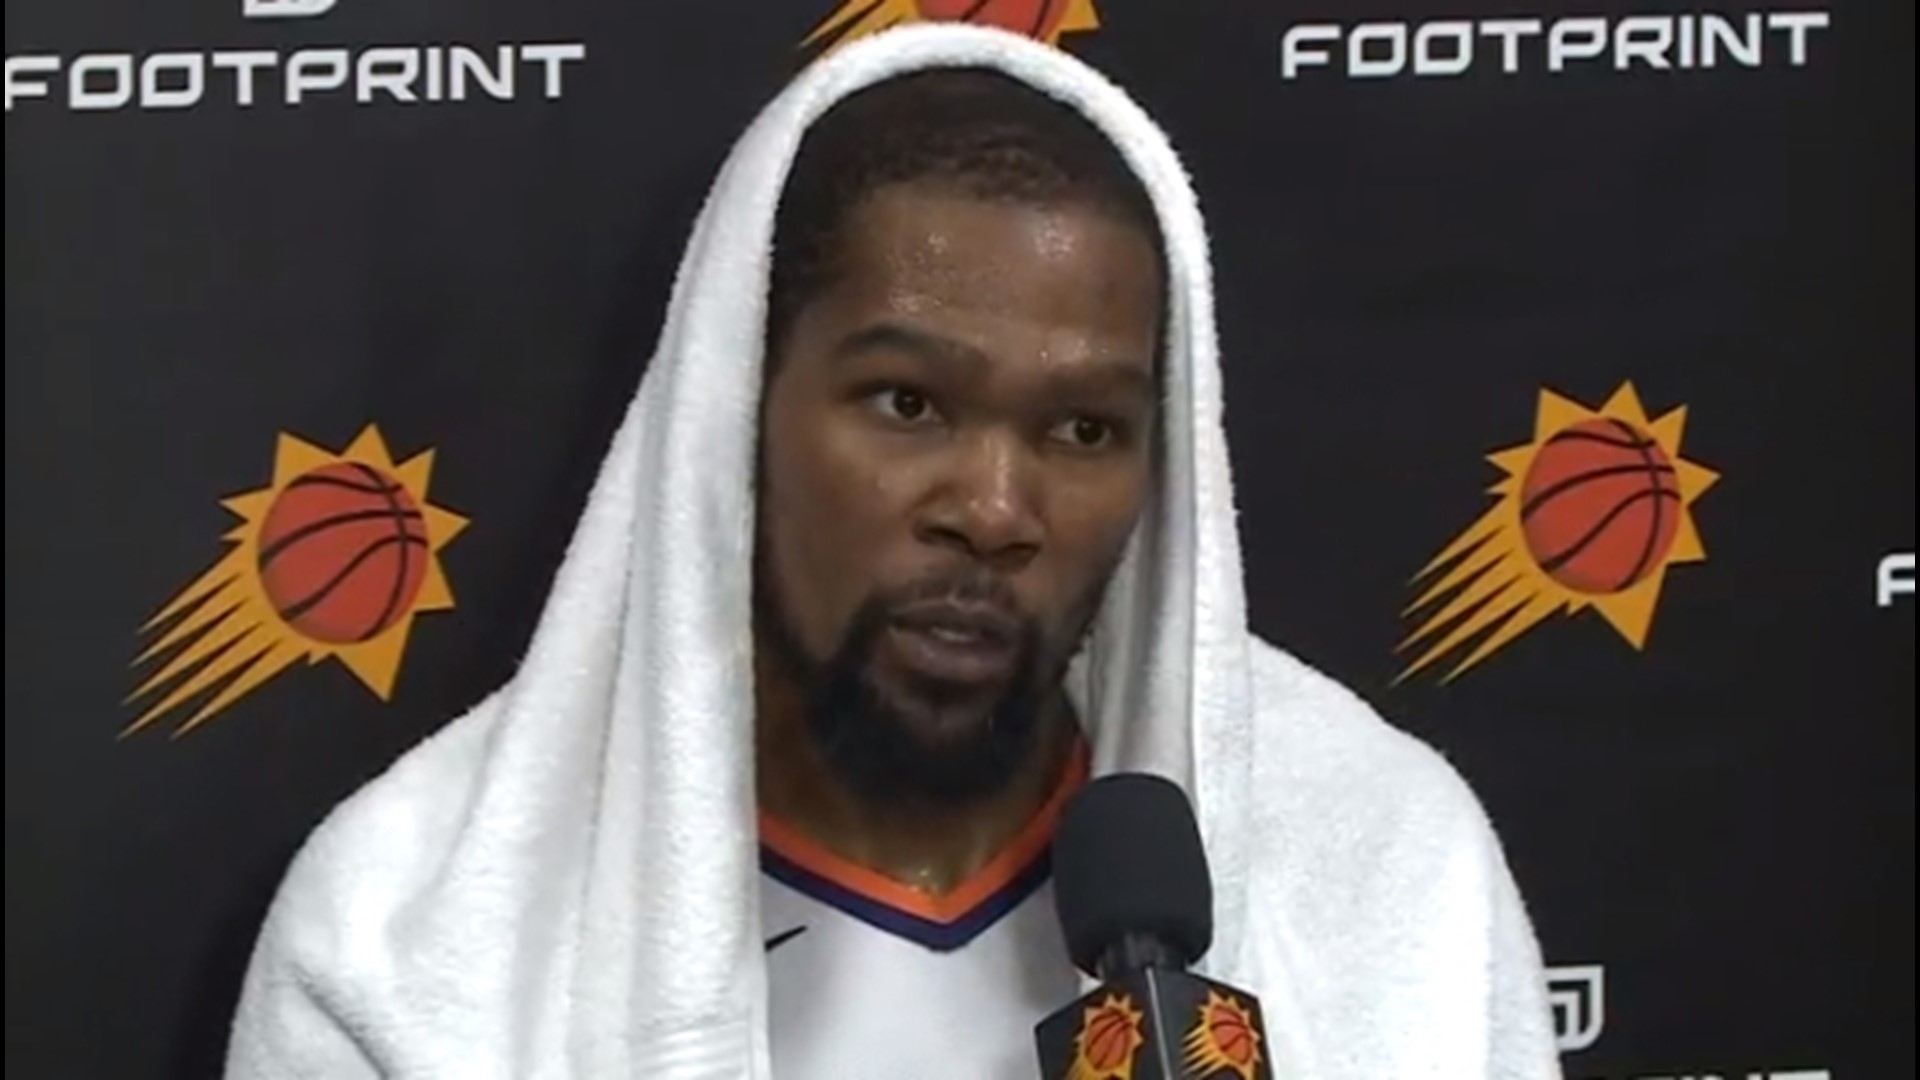 Valley sports fan were surely disappointed to hear that newly appointed power forward, Kevin Durant would not be playing his first home game on Wednesday.